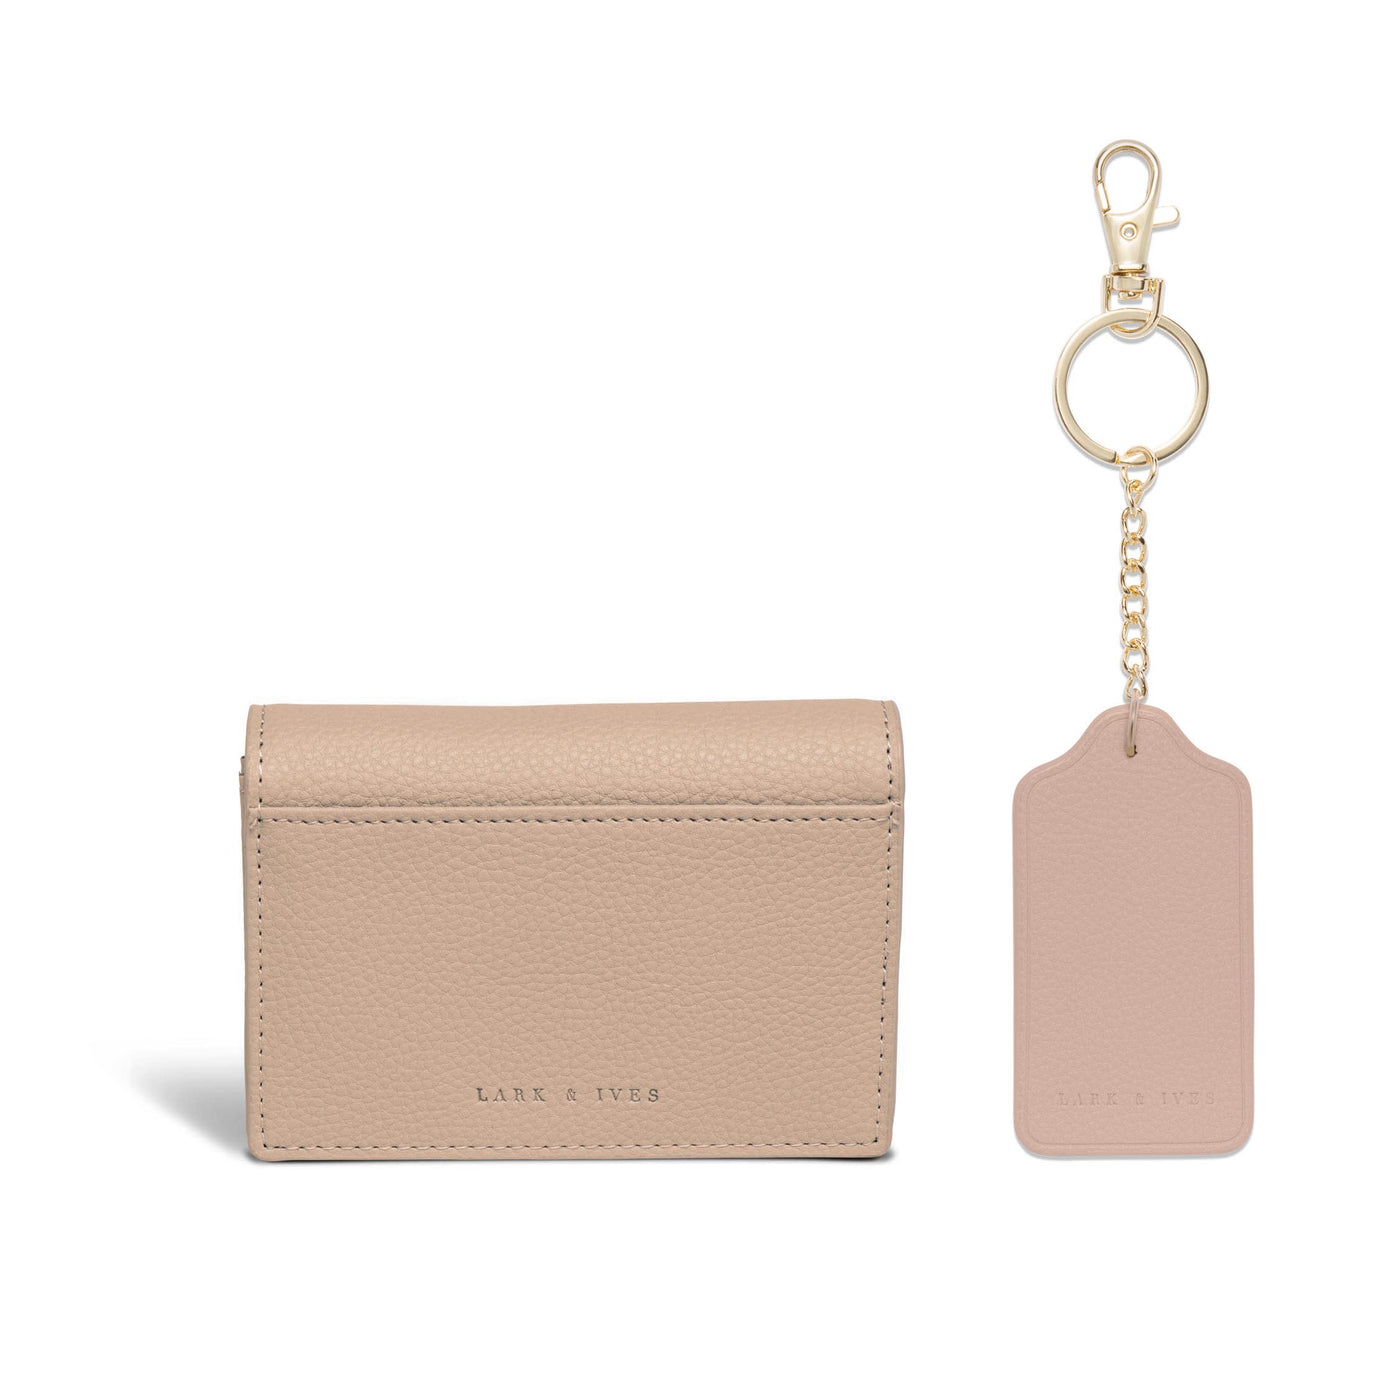 Lark and Ives / Vegan Leather Accessories / Small Accessories / Wallet / Mini Wallet / Card Case / Card Holder / Button snap closure / Fold Wallet / Tag Keychain / Keychain / Key Holder / Tan Card Case and Nude Pink Keychain